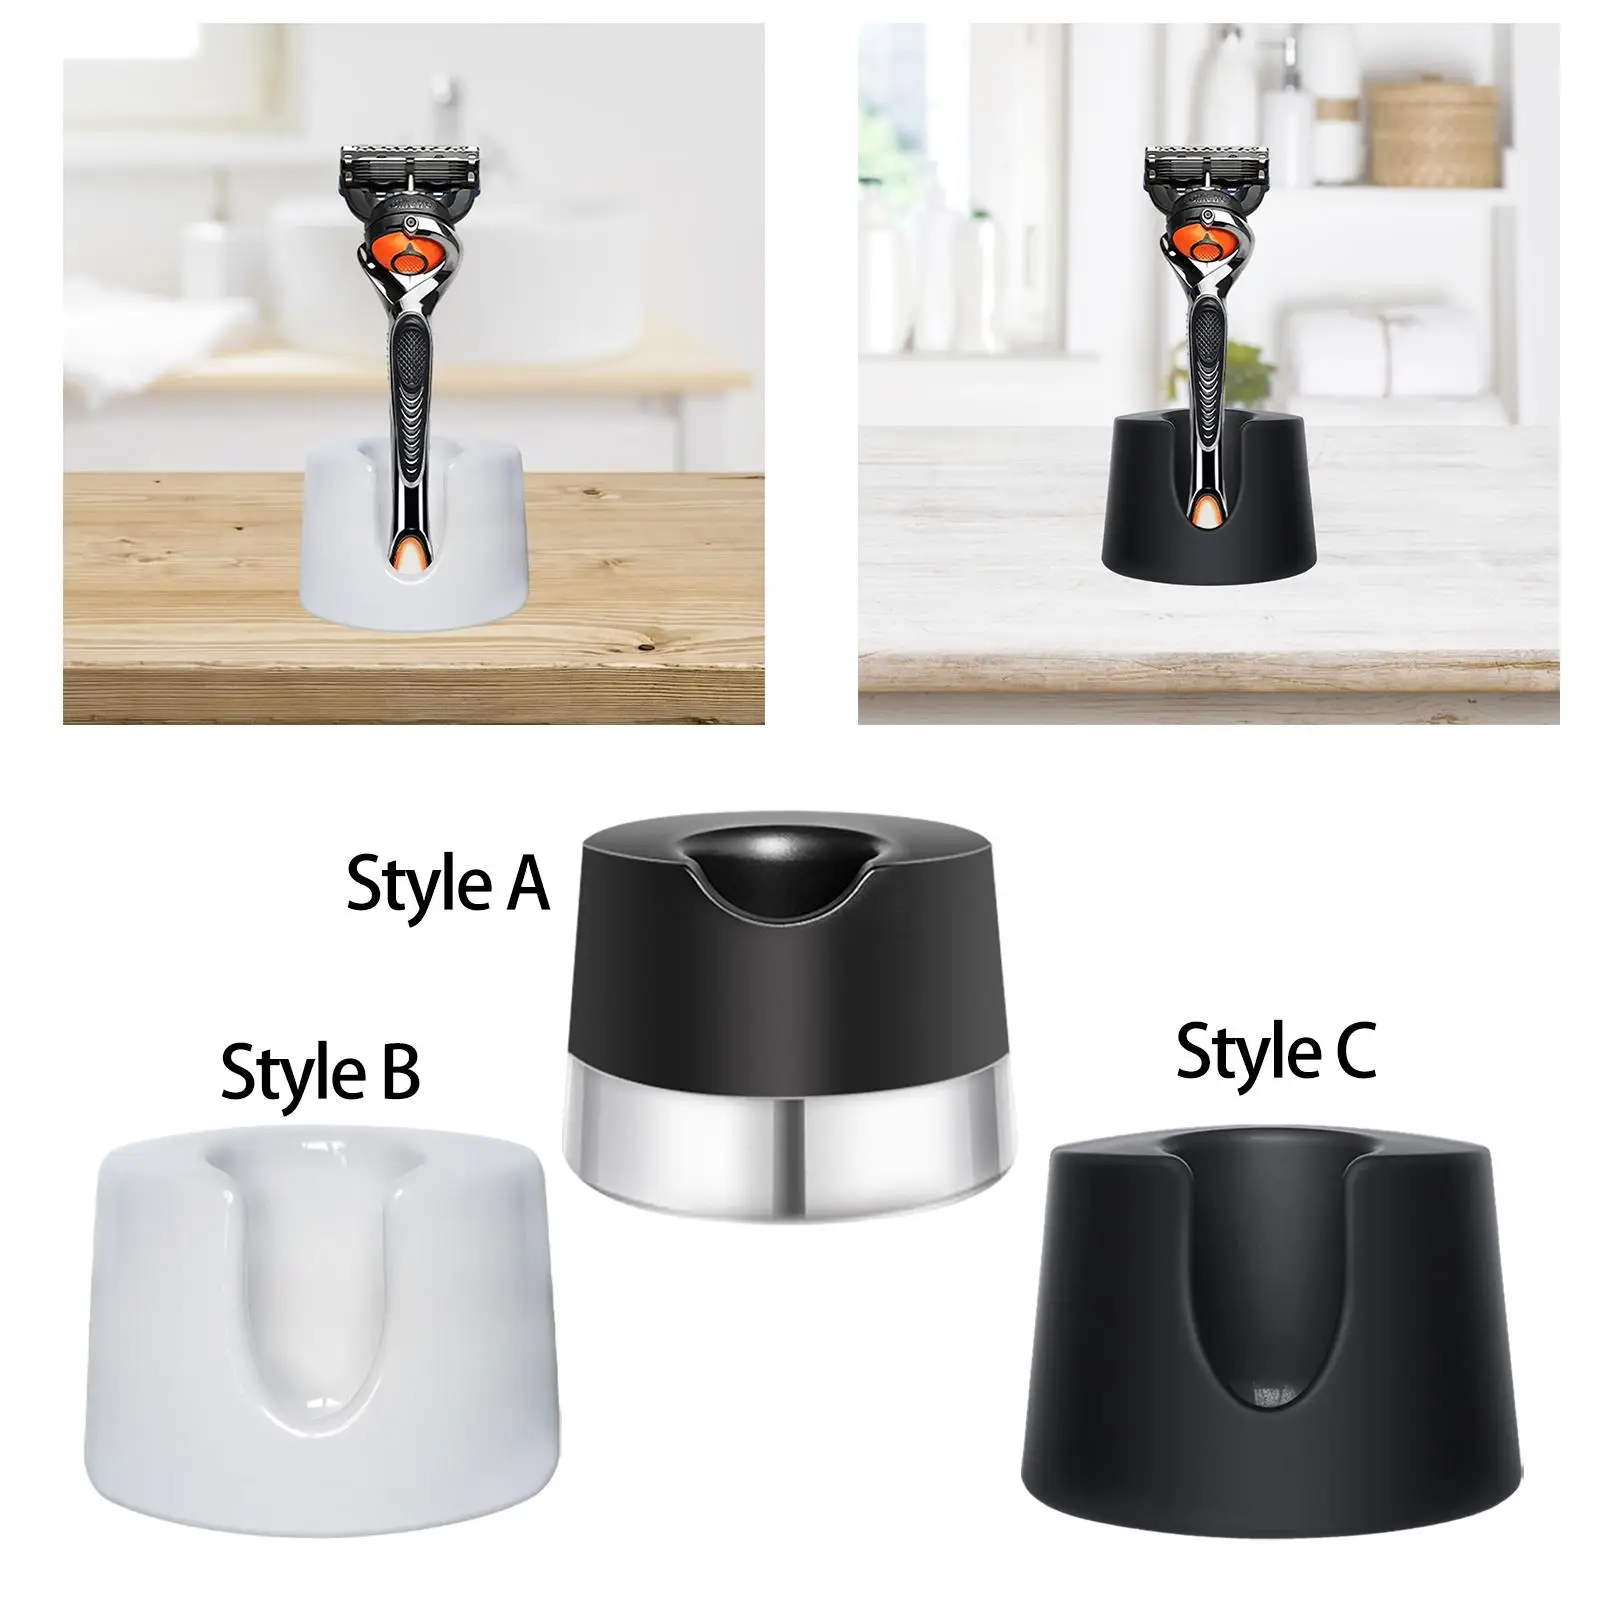 Manual Shaver Holder Drying Stand to Use Durable Countertops Accessories Safety Shaver Holder Base Shaver Holder for Skin